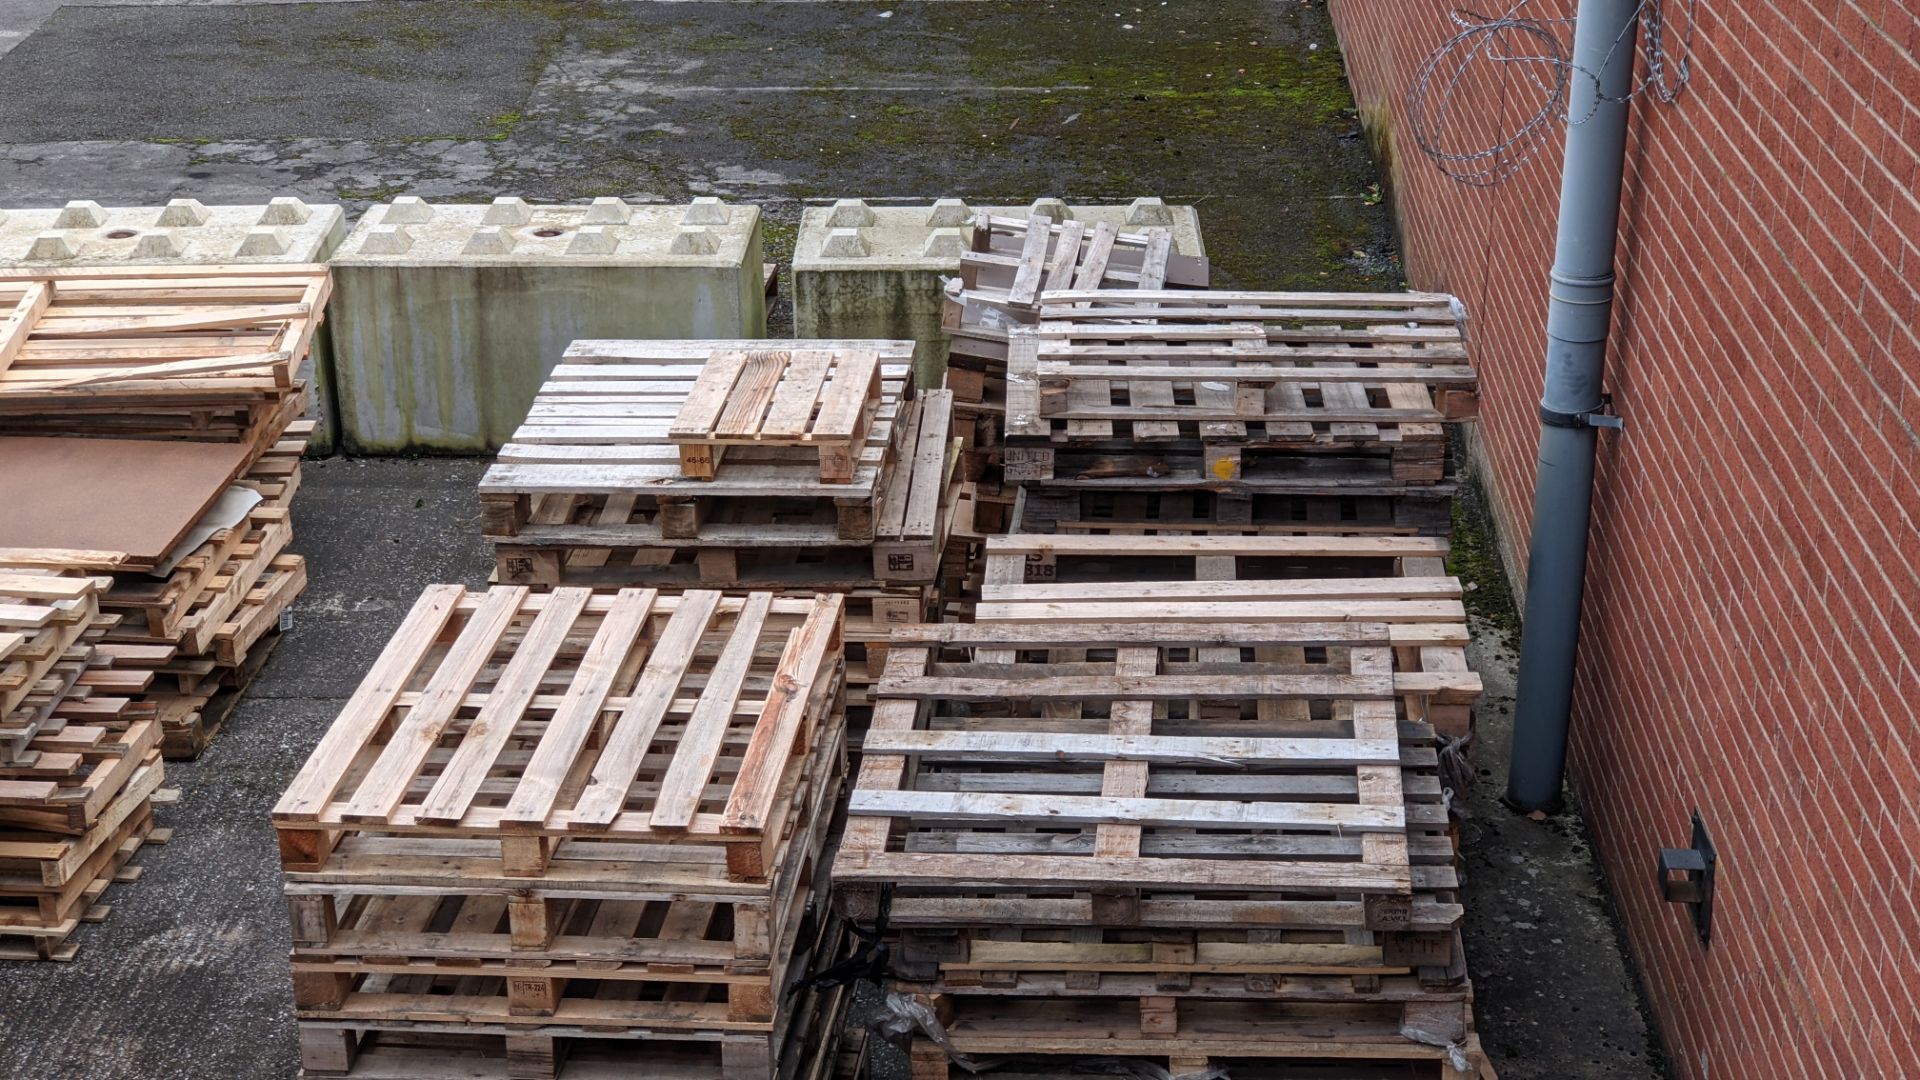 11 stacks of pallets, including regular size, euros, odd sizes and damaged. Approx 9-10 pallets per - Image 3 of 9